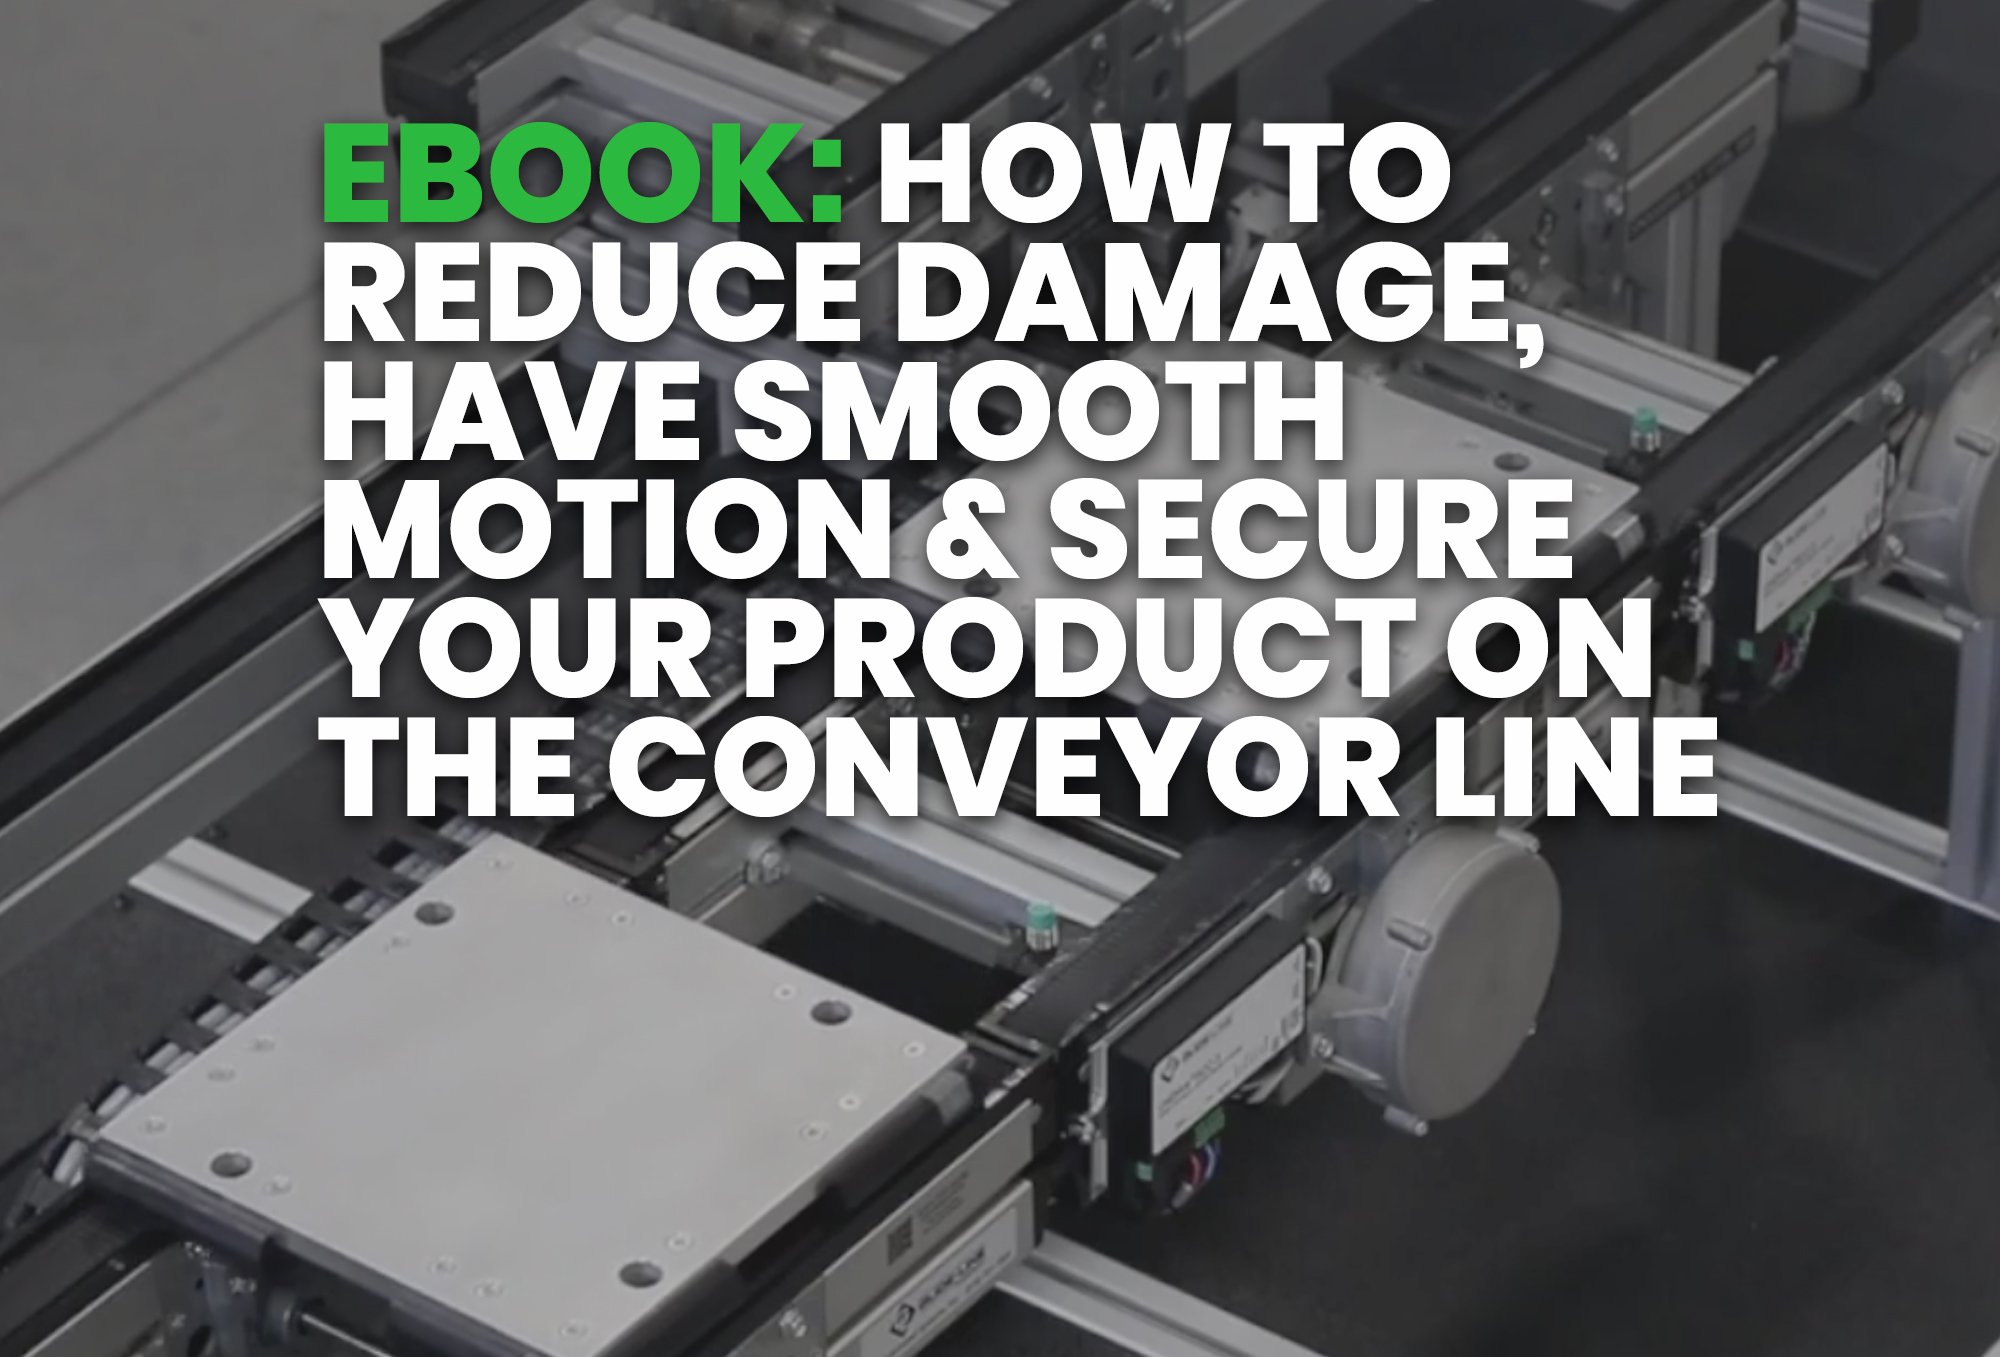 ebook- How To Reduce Damage, Have Smooth Motion & Secure Your Product On The Conveyor Line